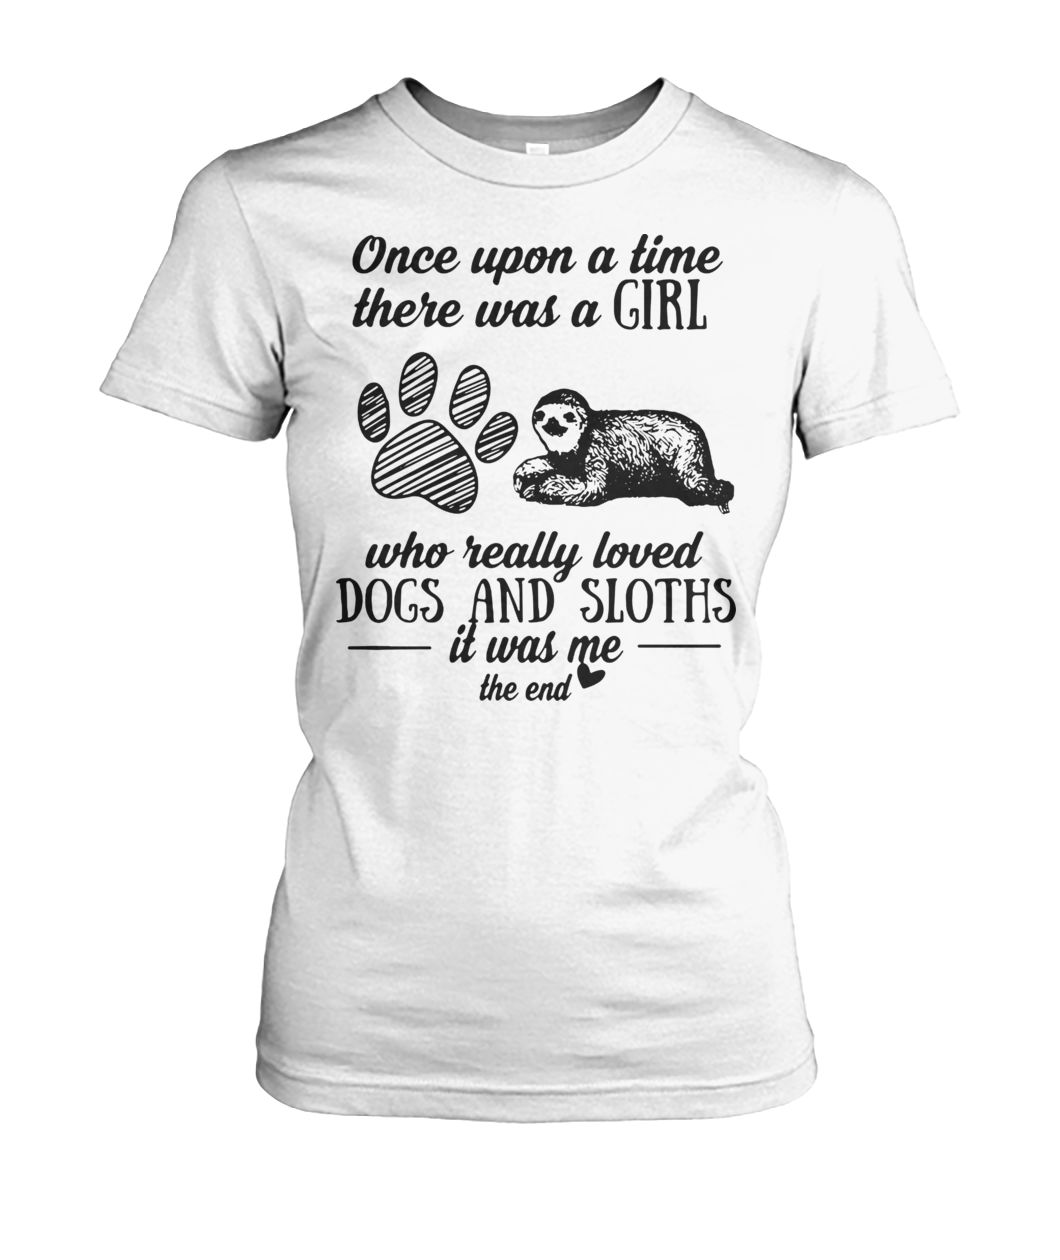 Once upon a time there was a girl who really loved dogs and sloths it was me women's crew tee